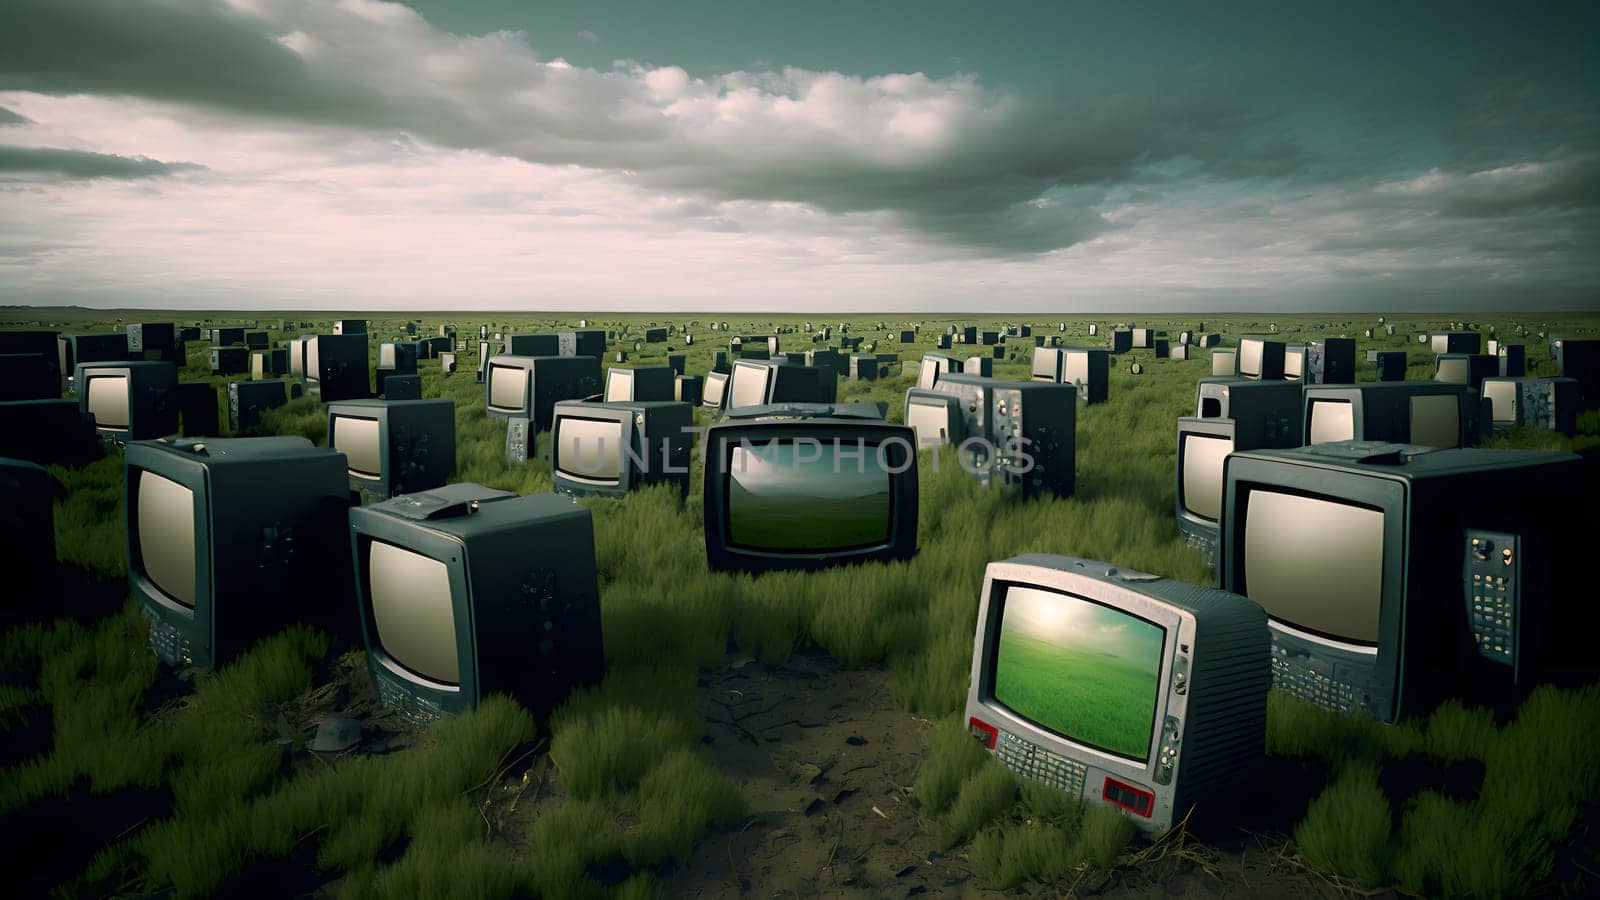 field covered with old analog tv sets at summer daylight, neural network generated art by z1b